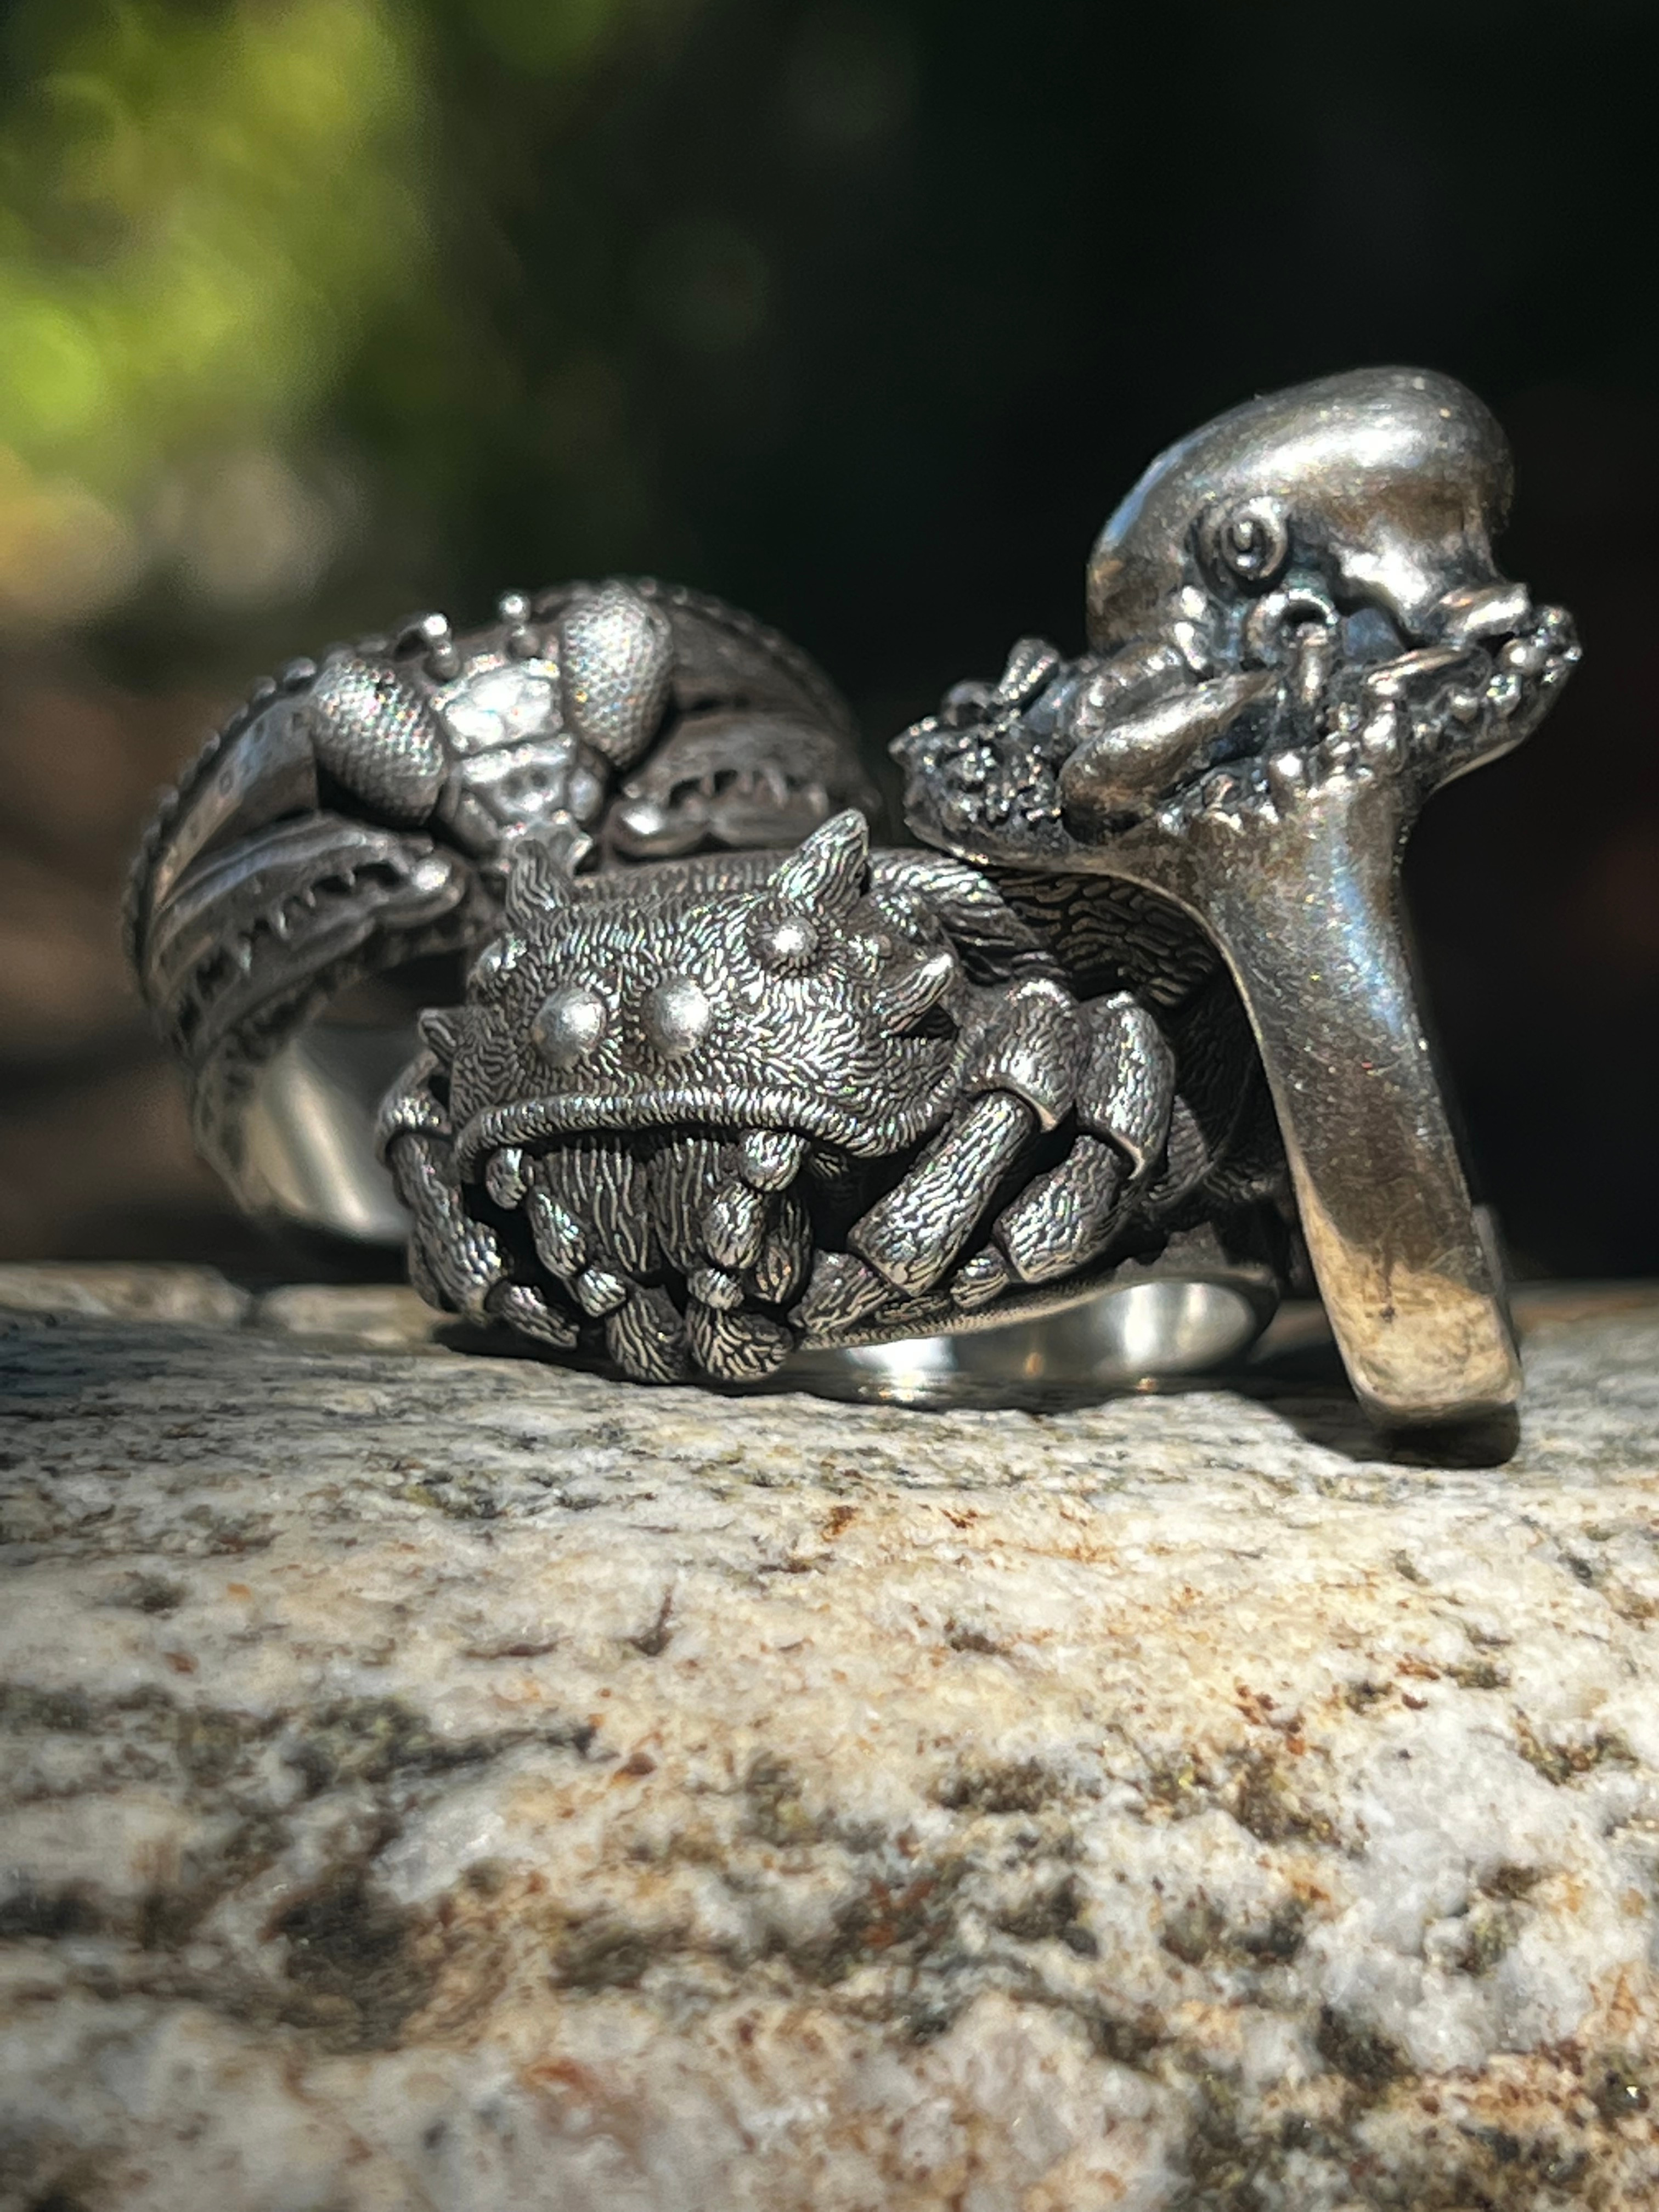 Photo of ring cast in sterling silver. For sale at www.zbrushjewelrywarehouse.com